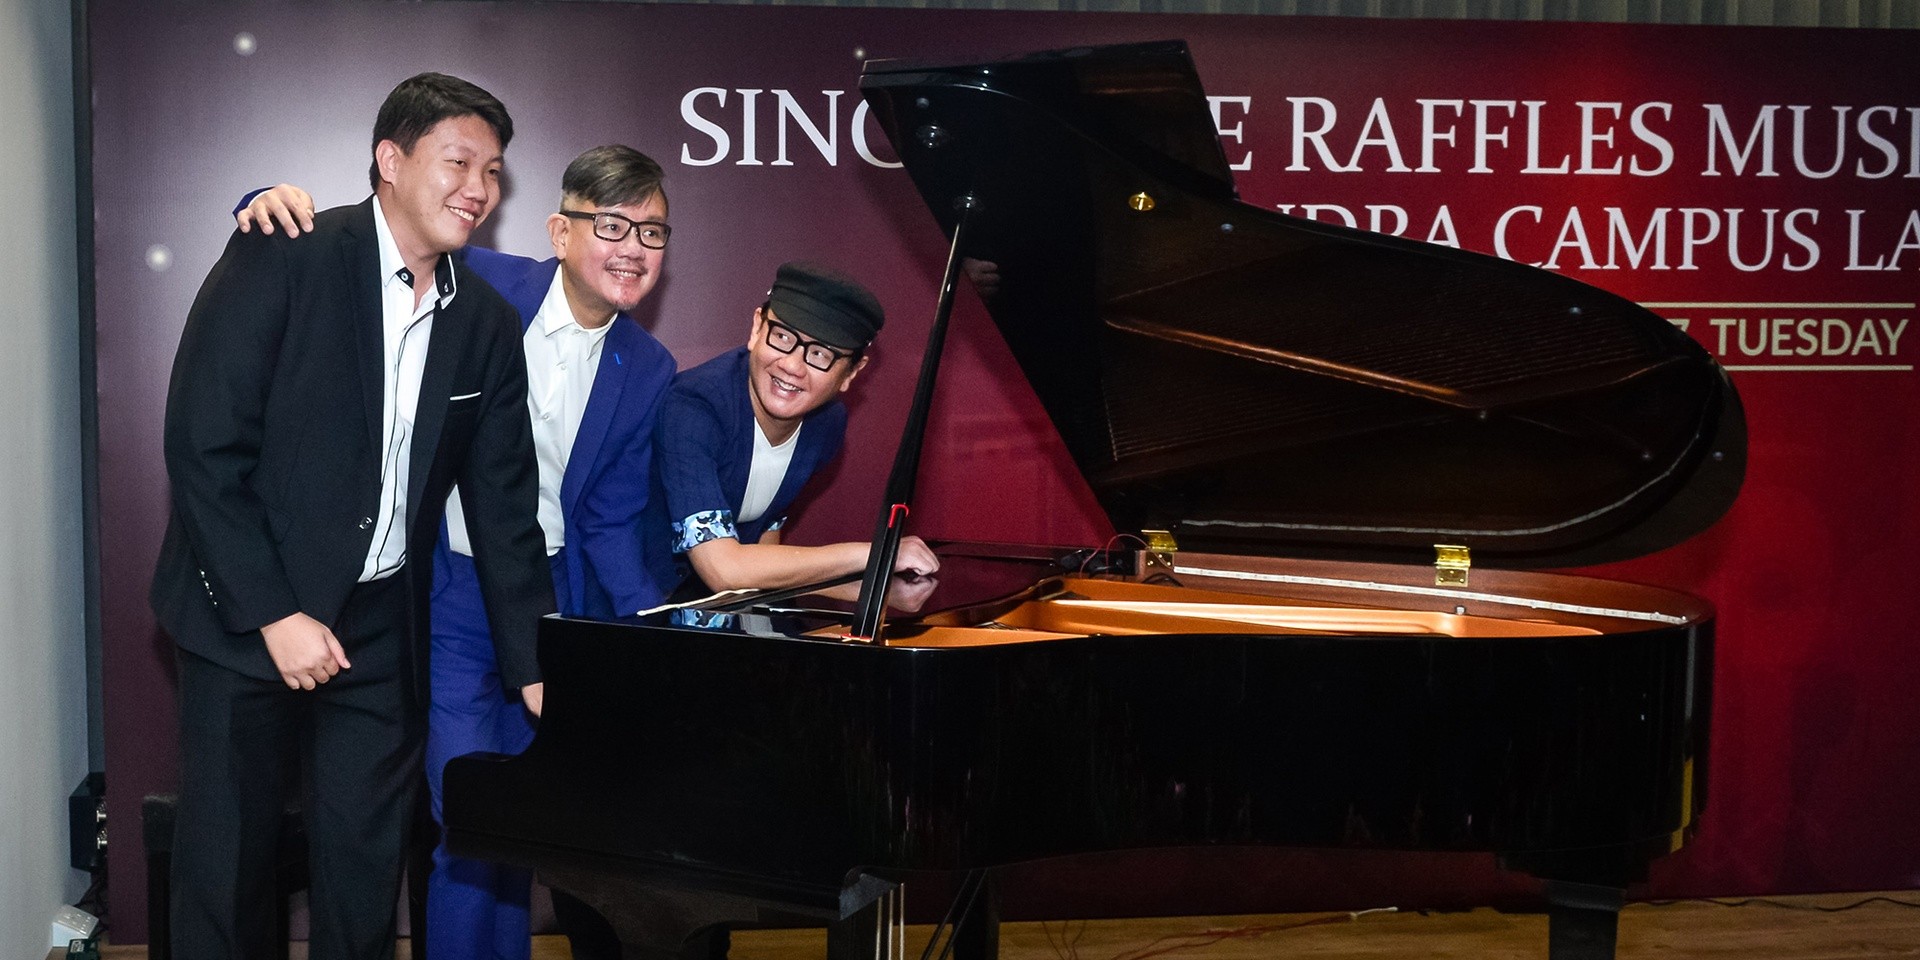 Singapore Raffles Music College officially launches flagship campus